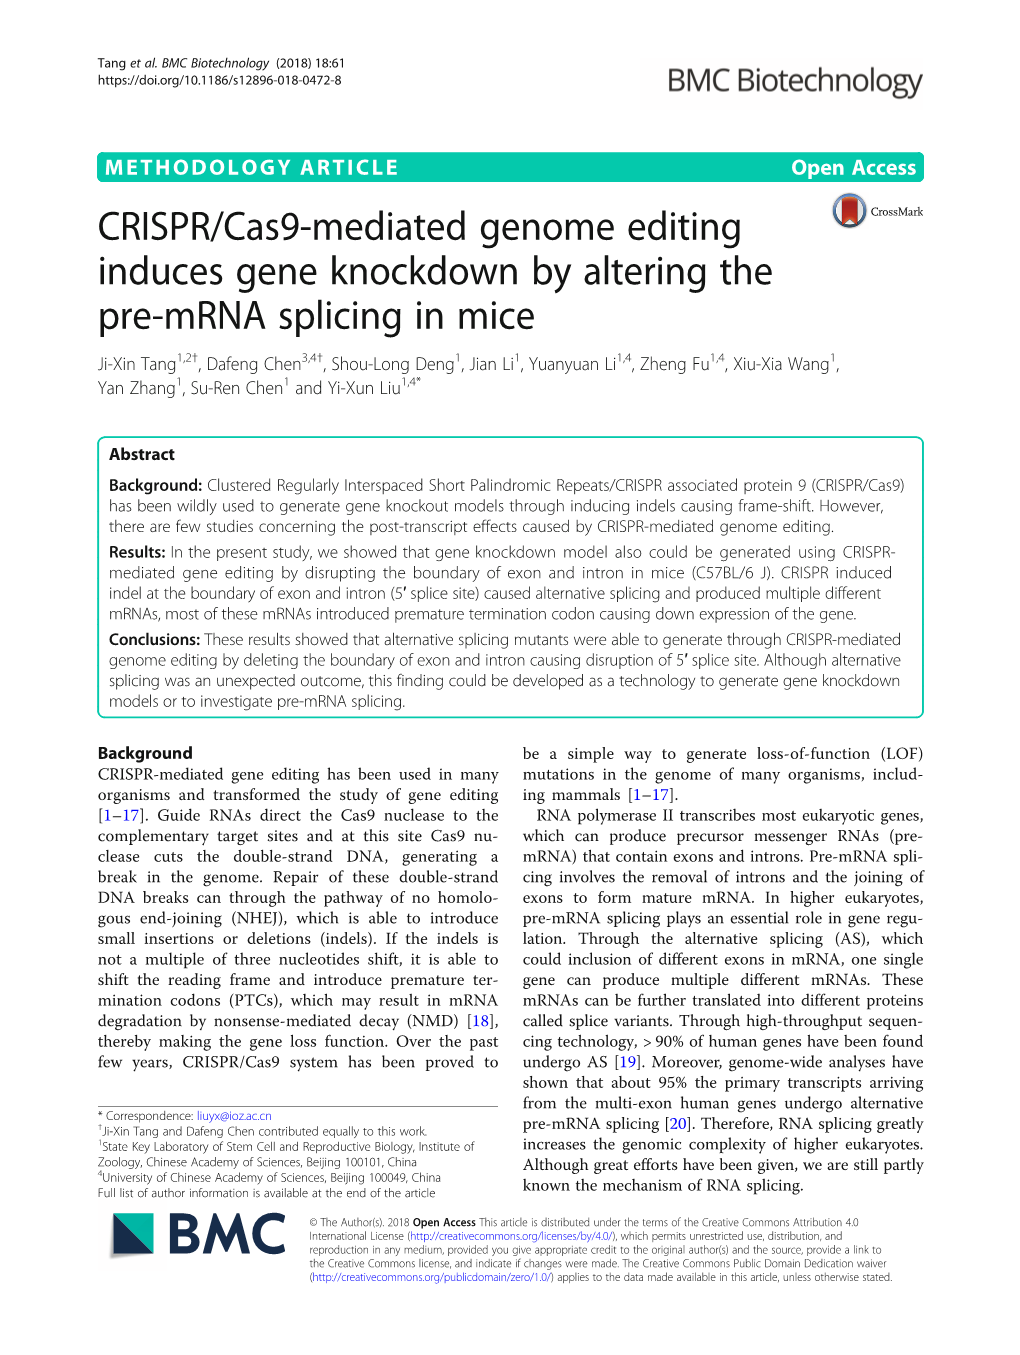 CRISPR/Cas9-Mediated Genome Editing Induces Gene Knockdown By